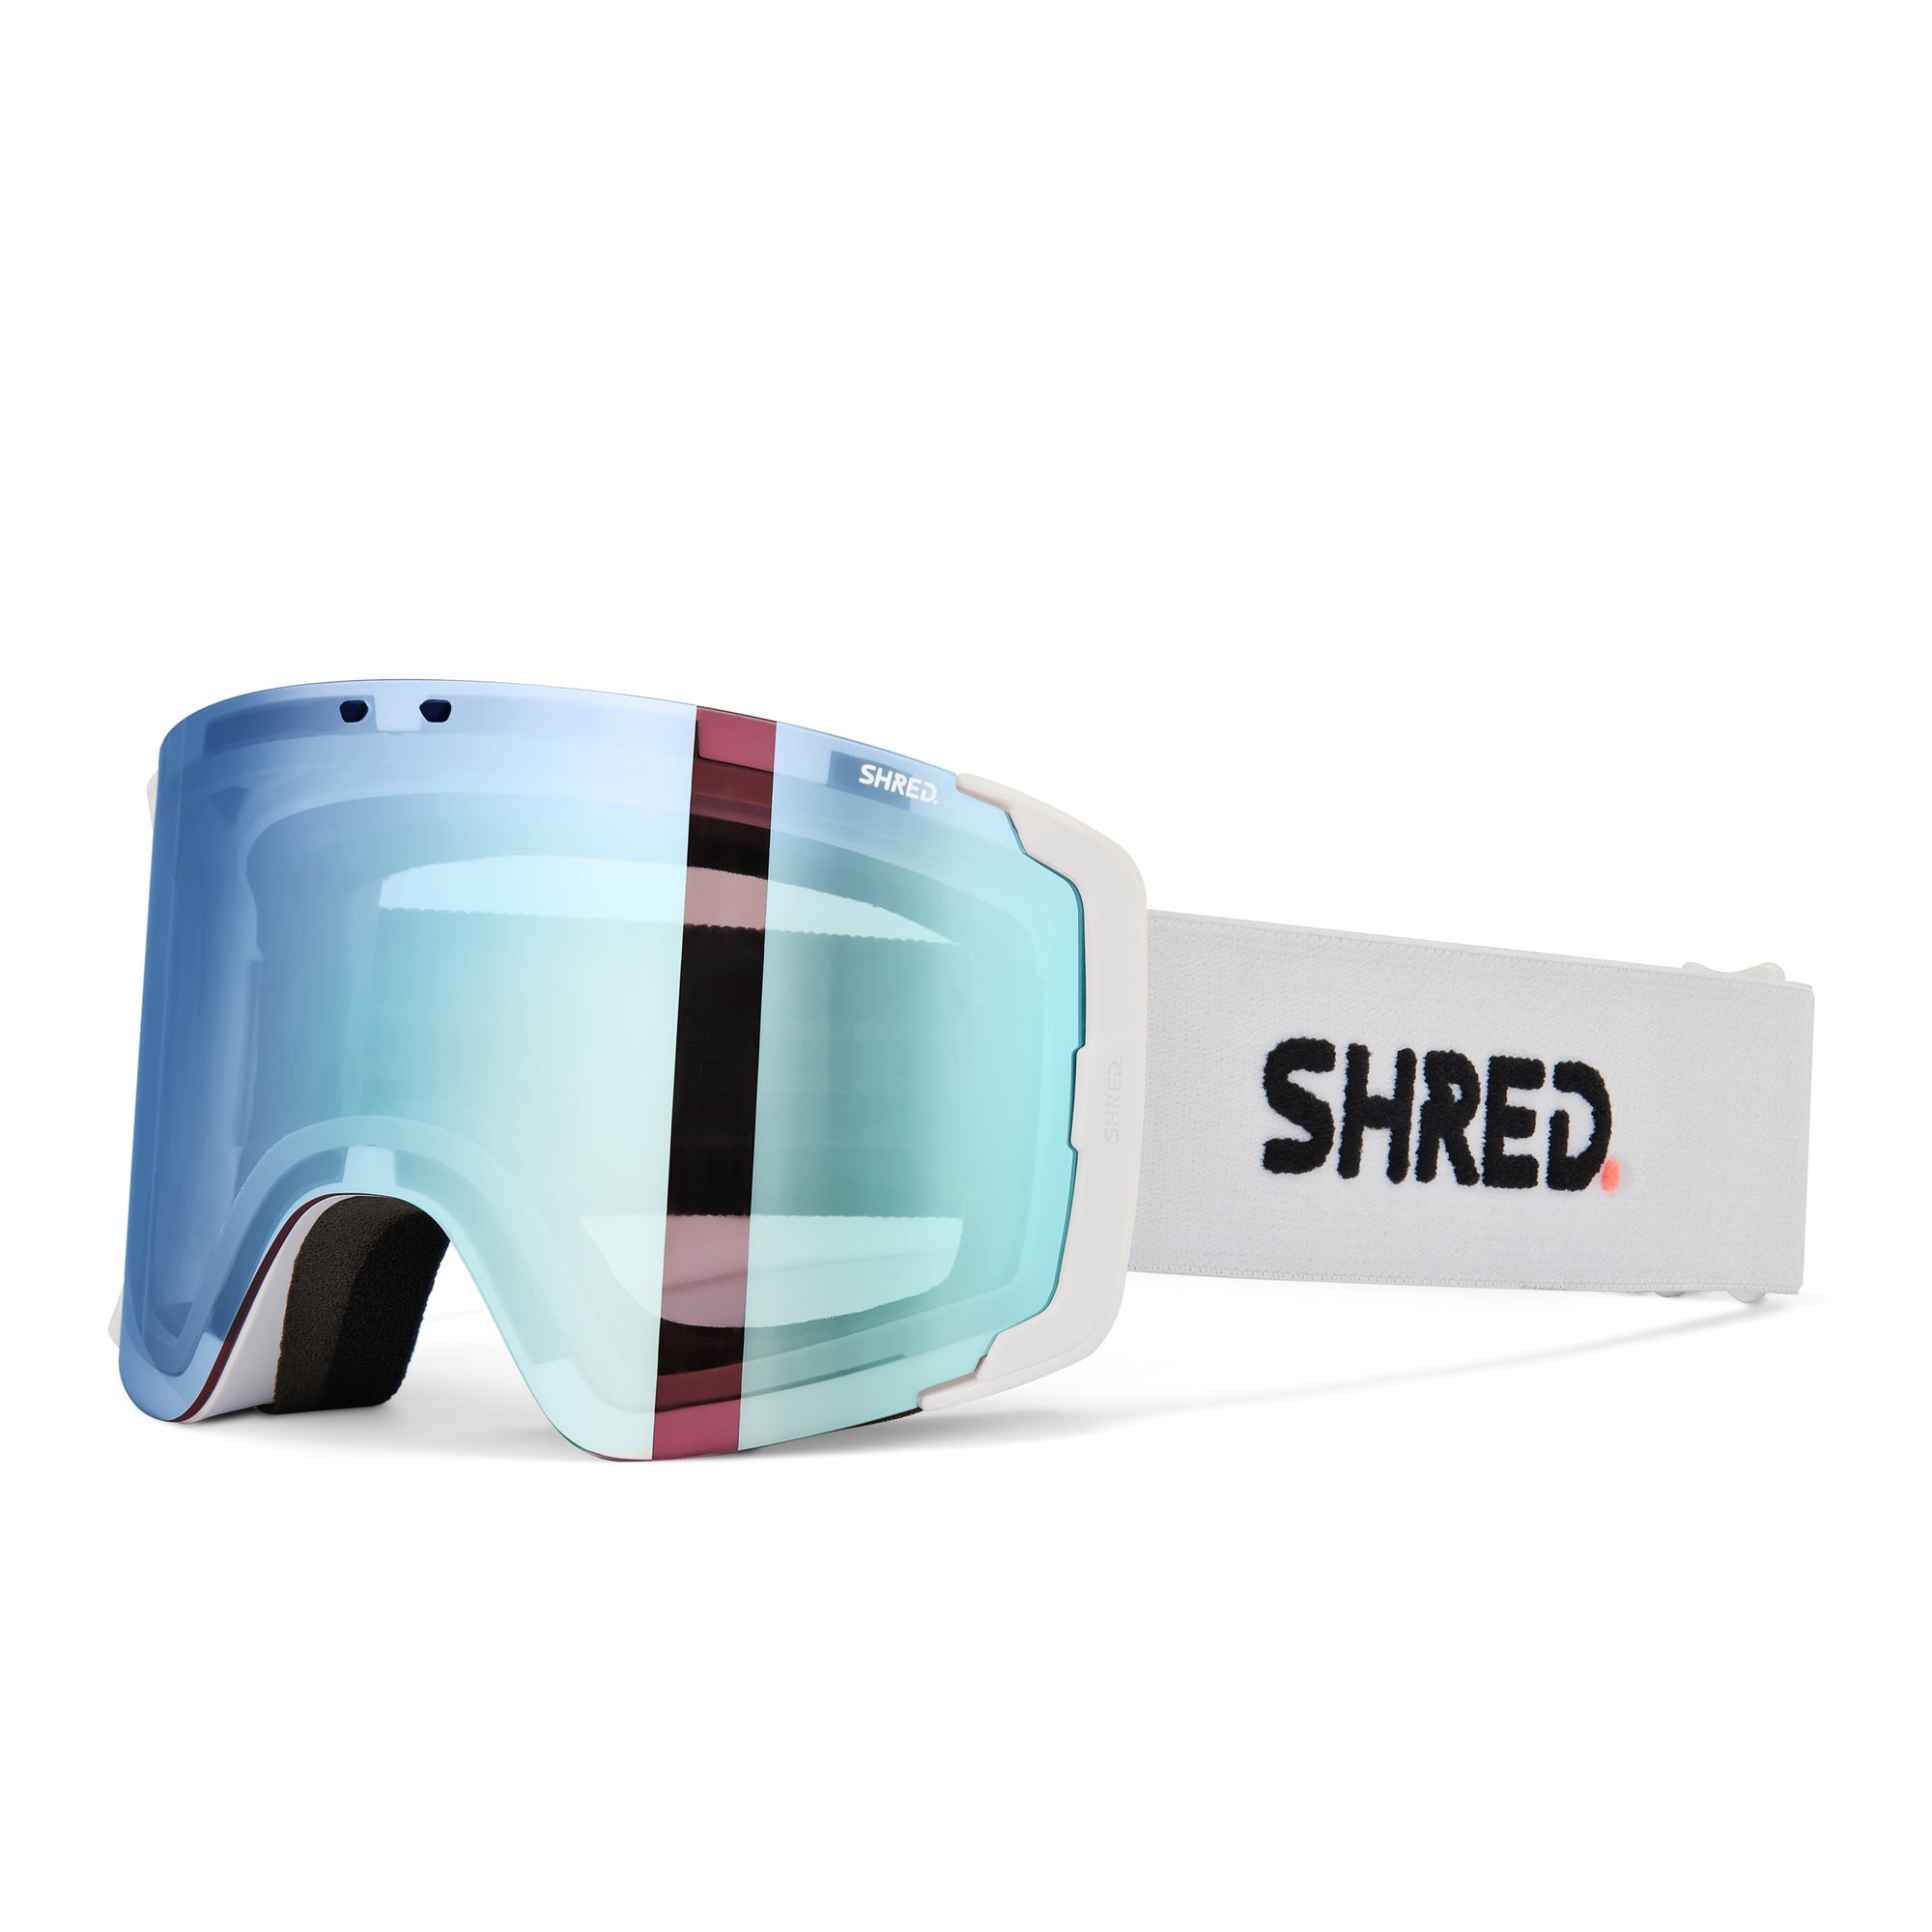 GIFTS FOR SNOWBOARDERS